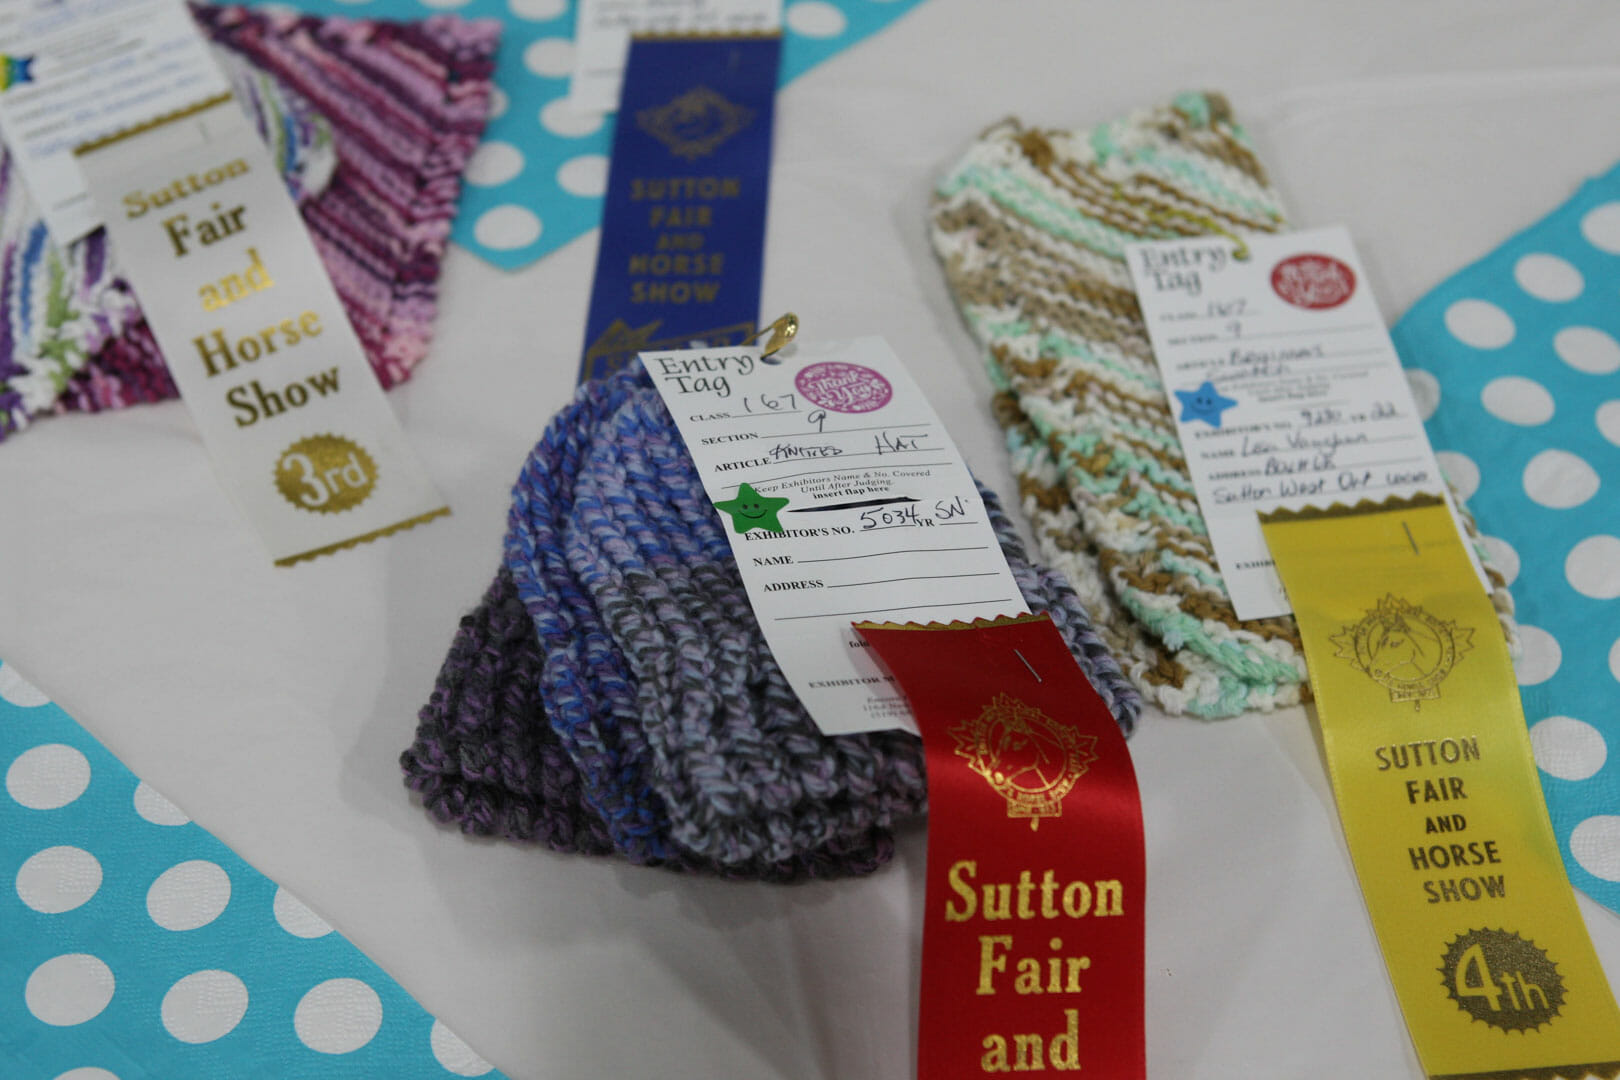 Special Needs competition at Sutton Fair